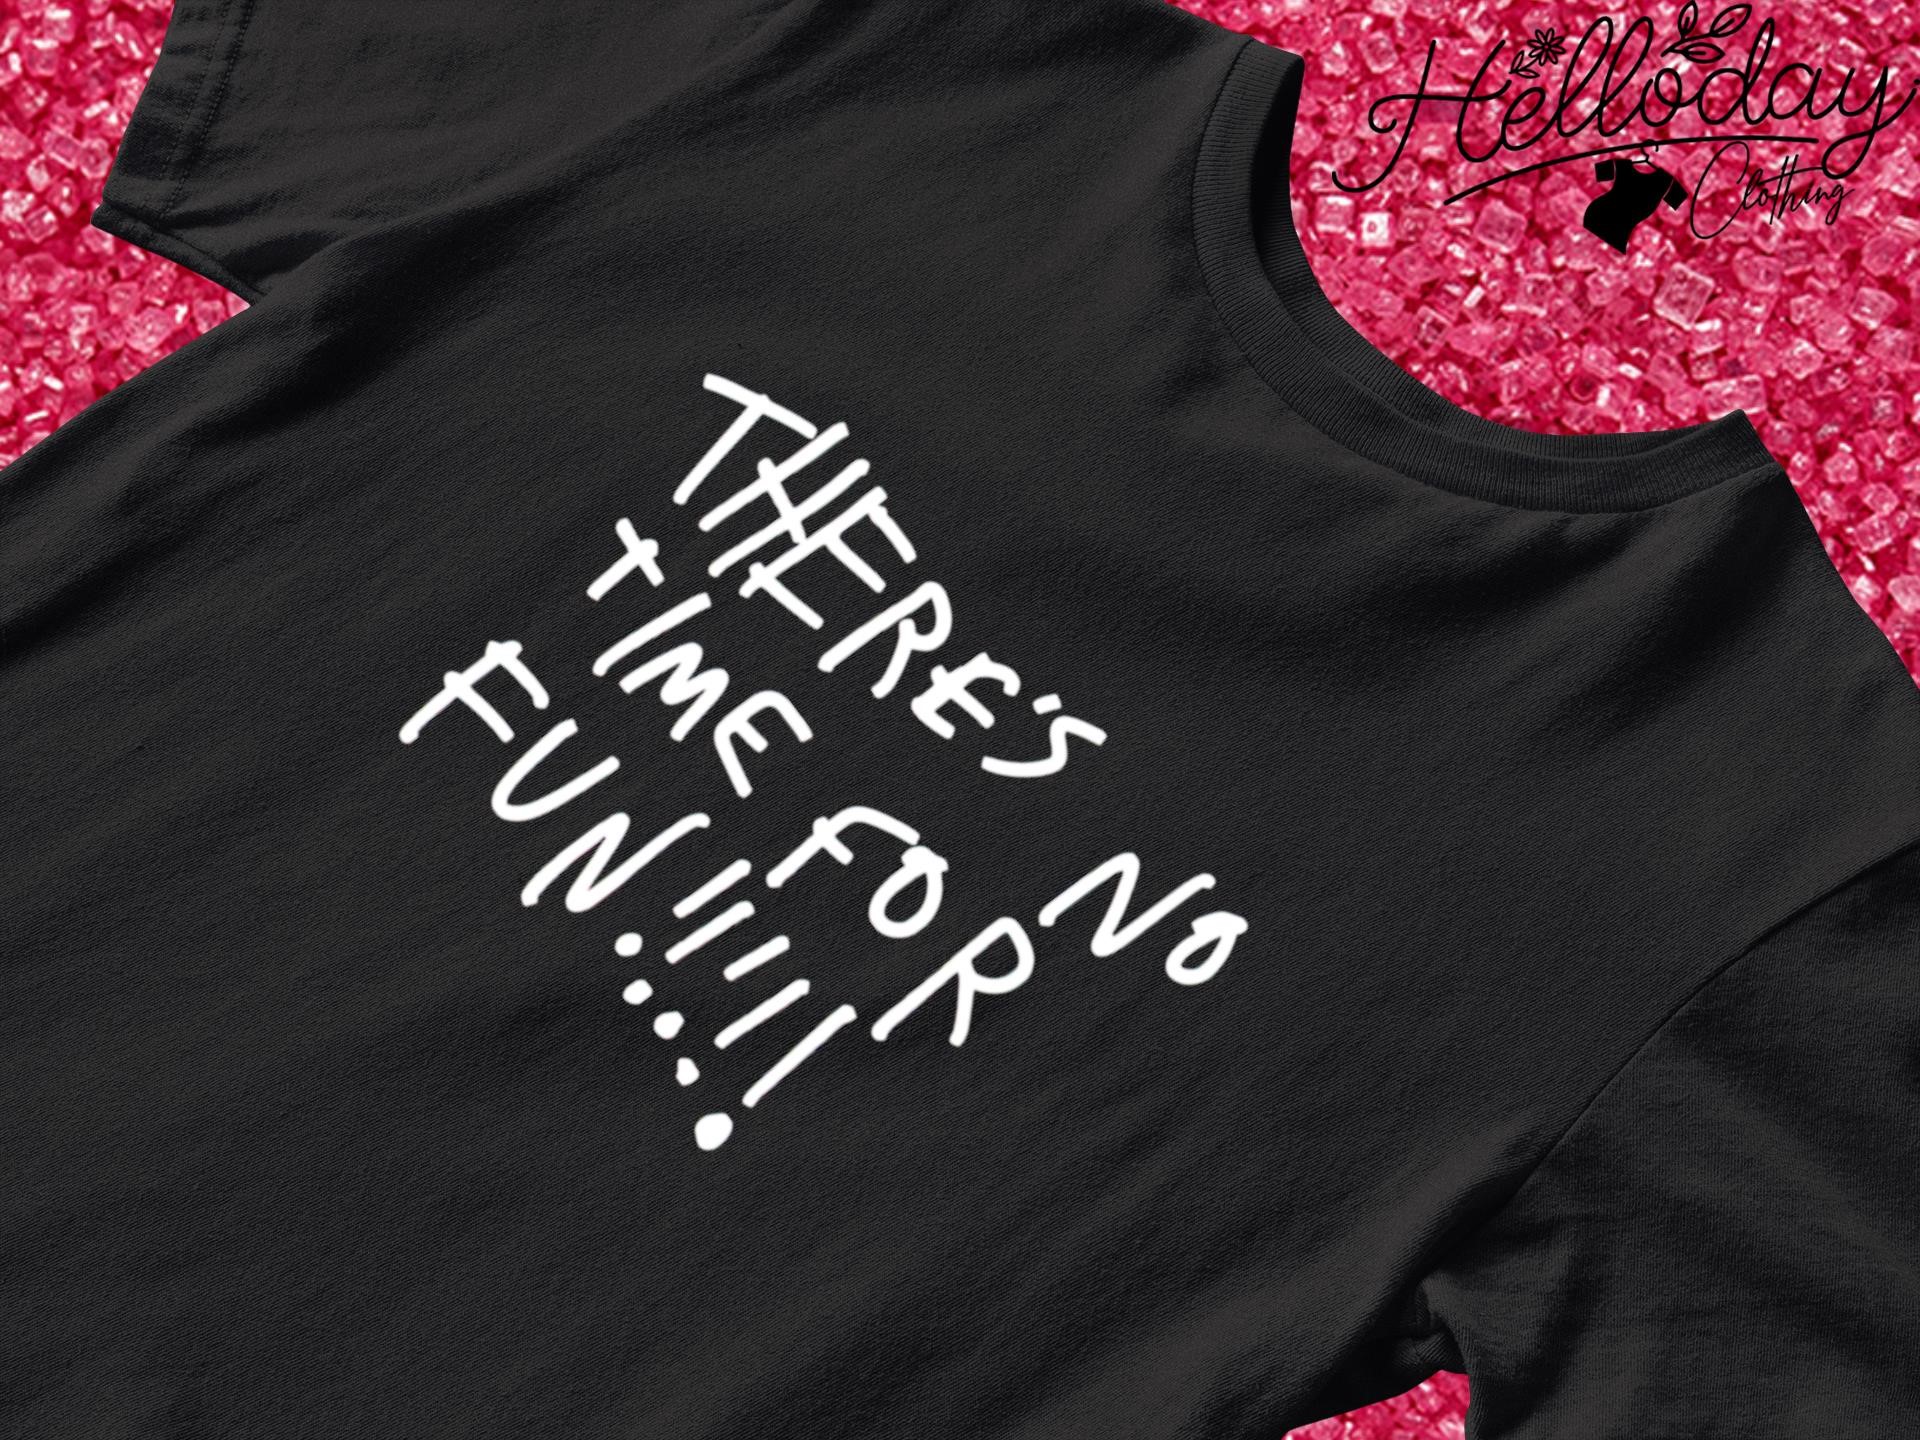 There's no time for fun shirt